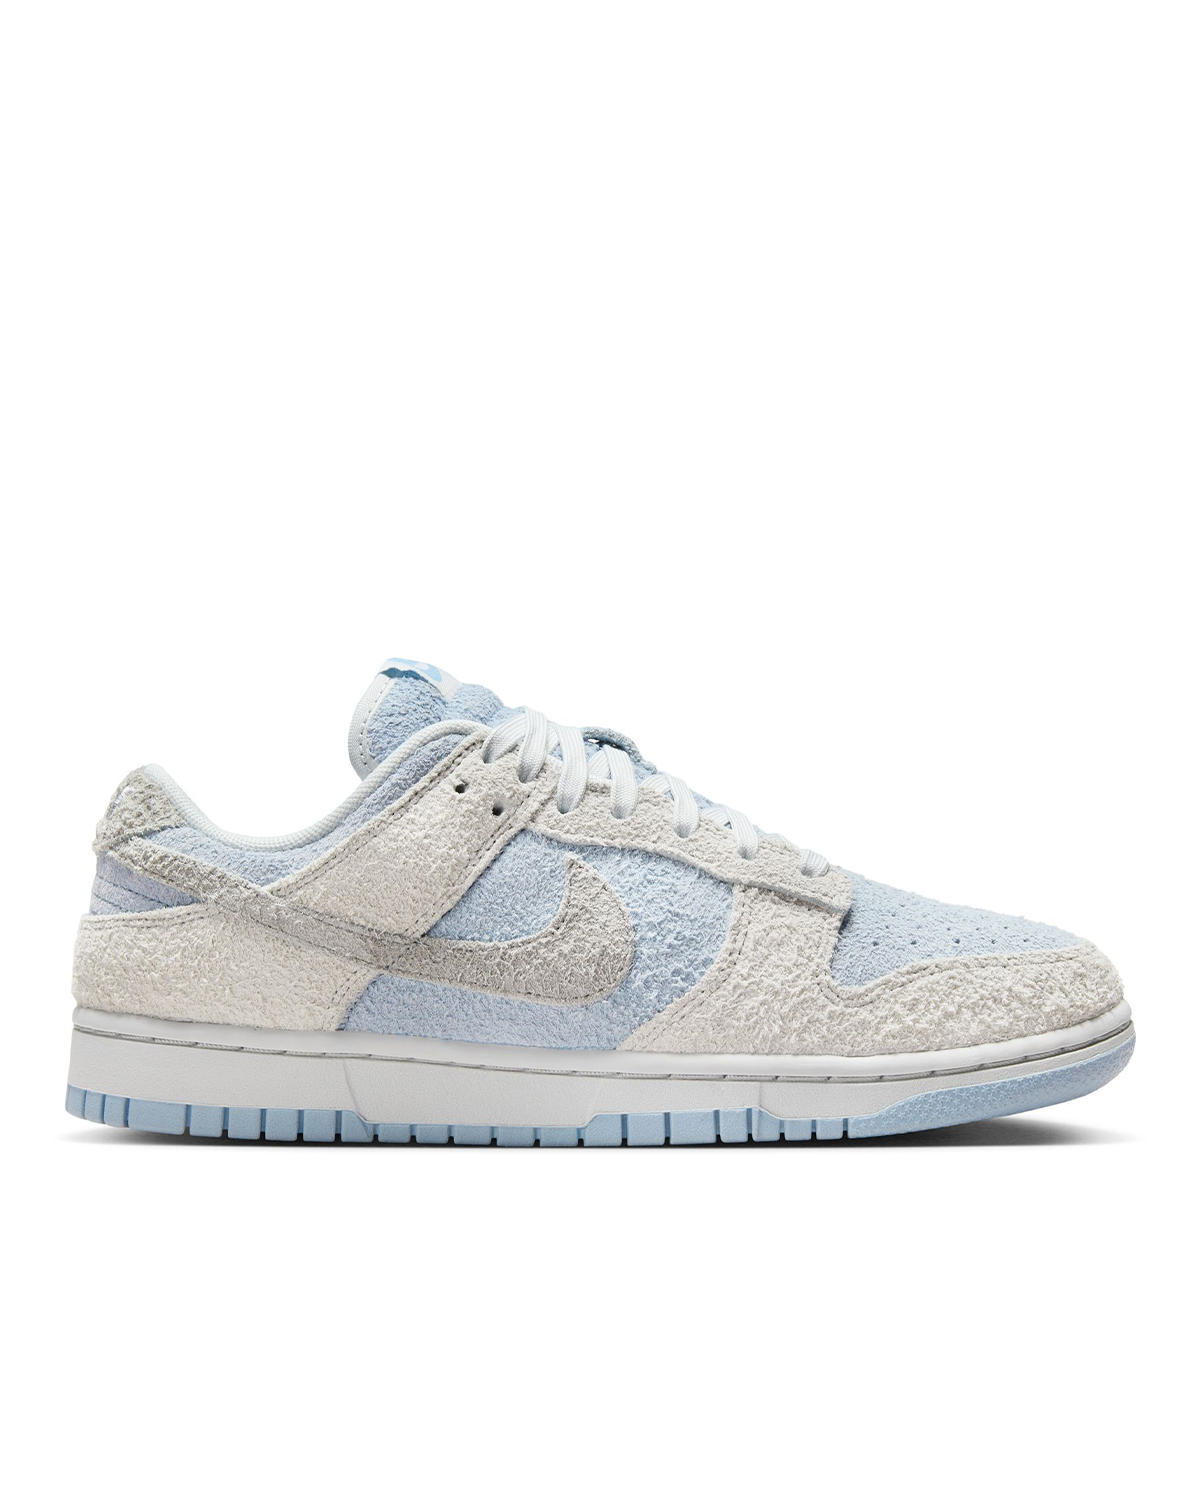 Dunk Low Light Armory Blue and Photon Dust (Womens)